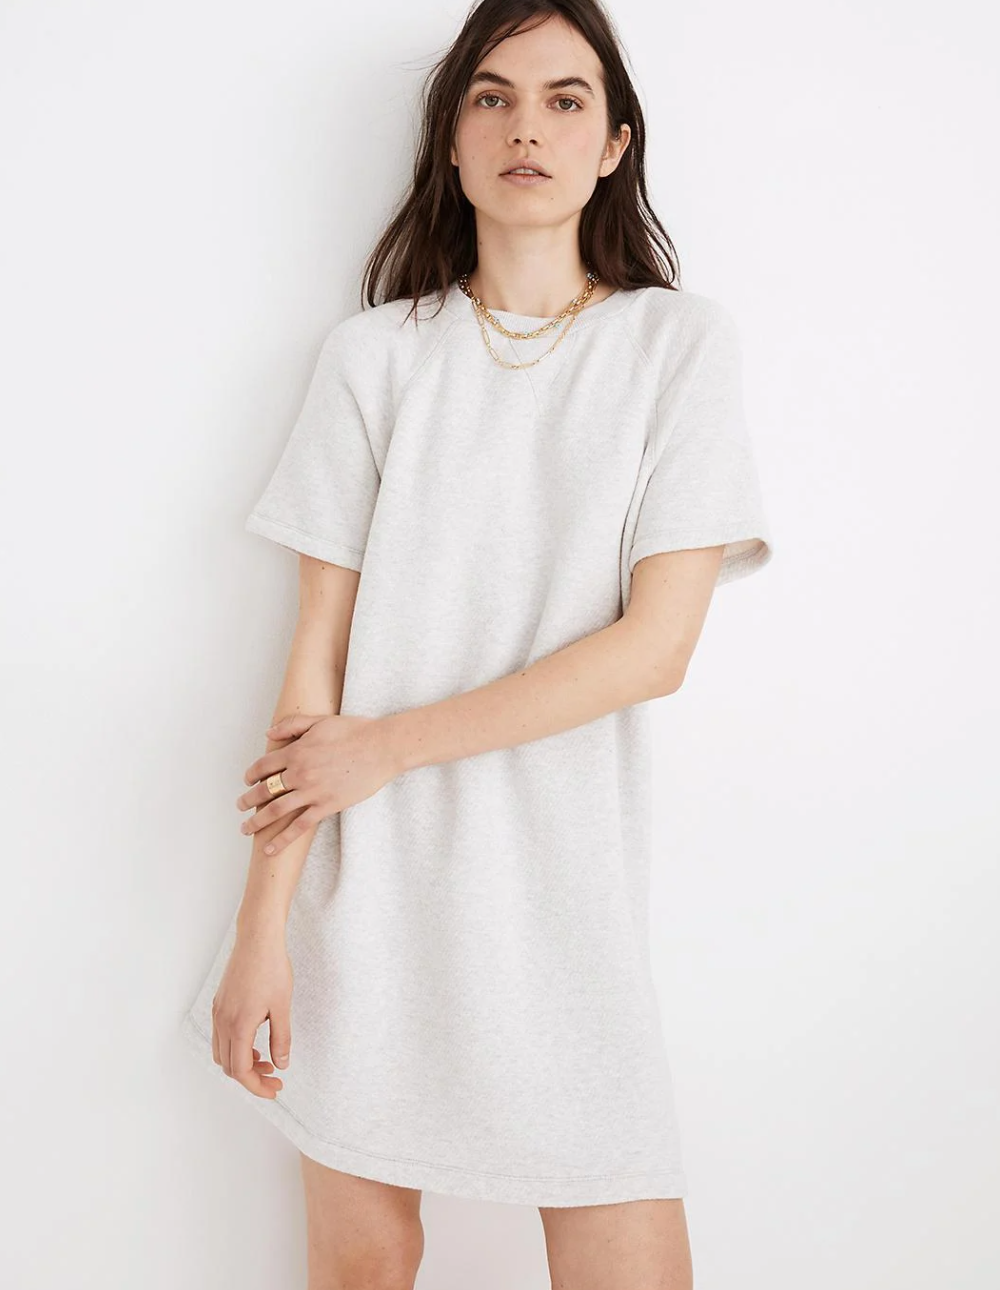 Best T-Shirt Dress Styles For Summer Style 2021